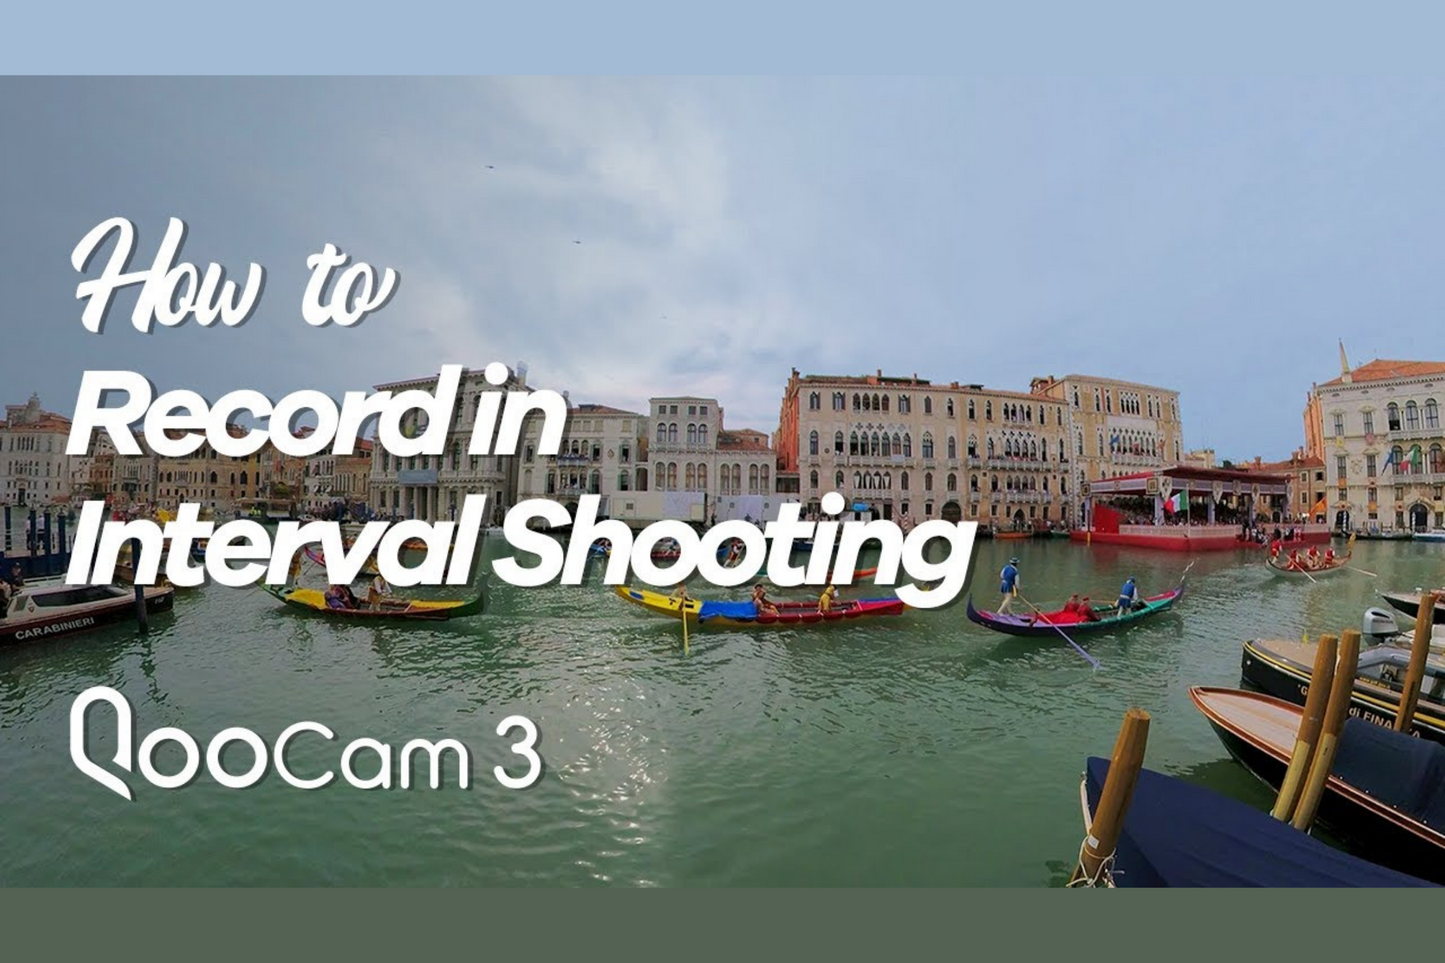 QooCam 3 Tutorial- How to Record in Interval Shooting (ft. Chiara & Luca)